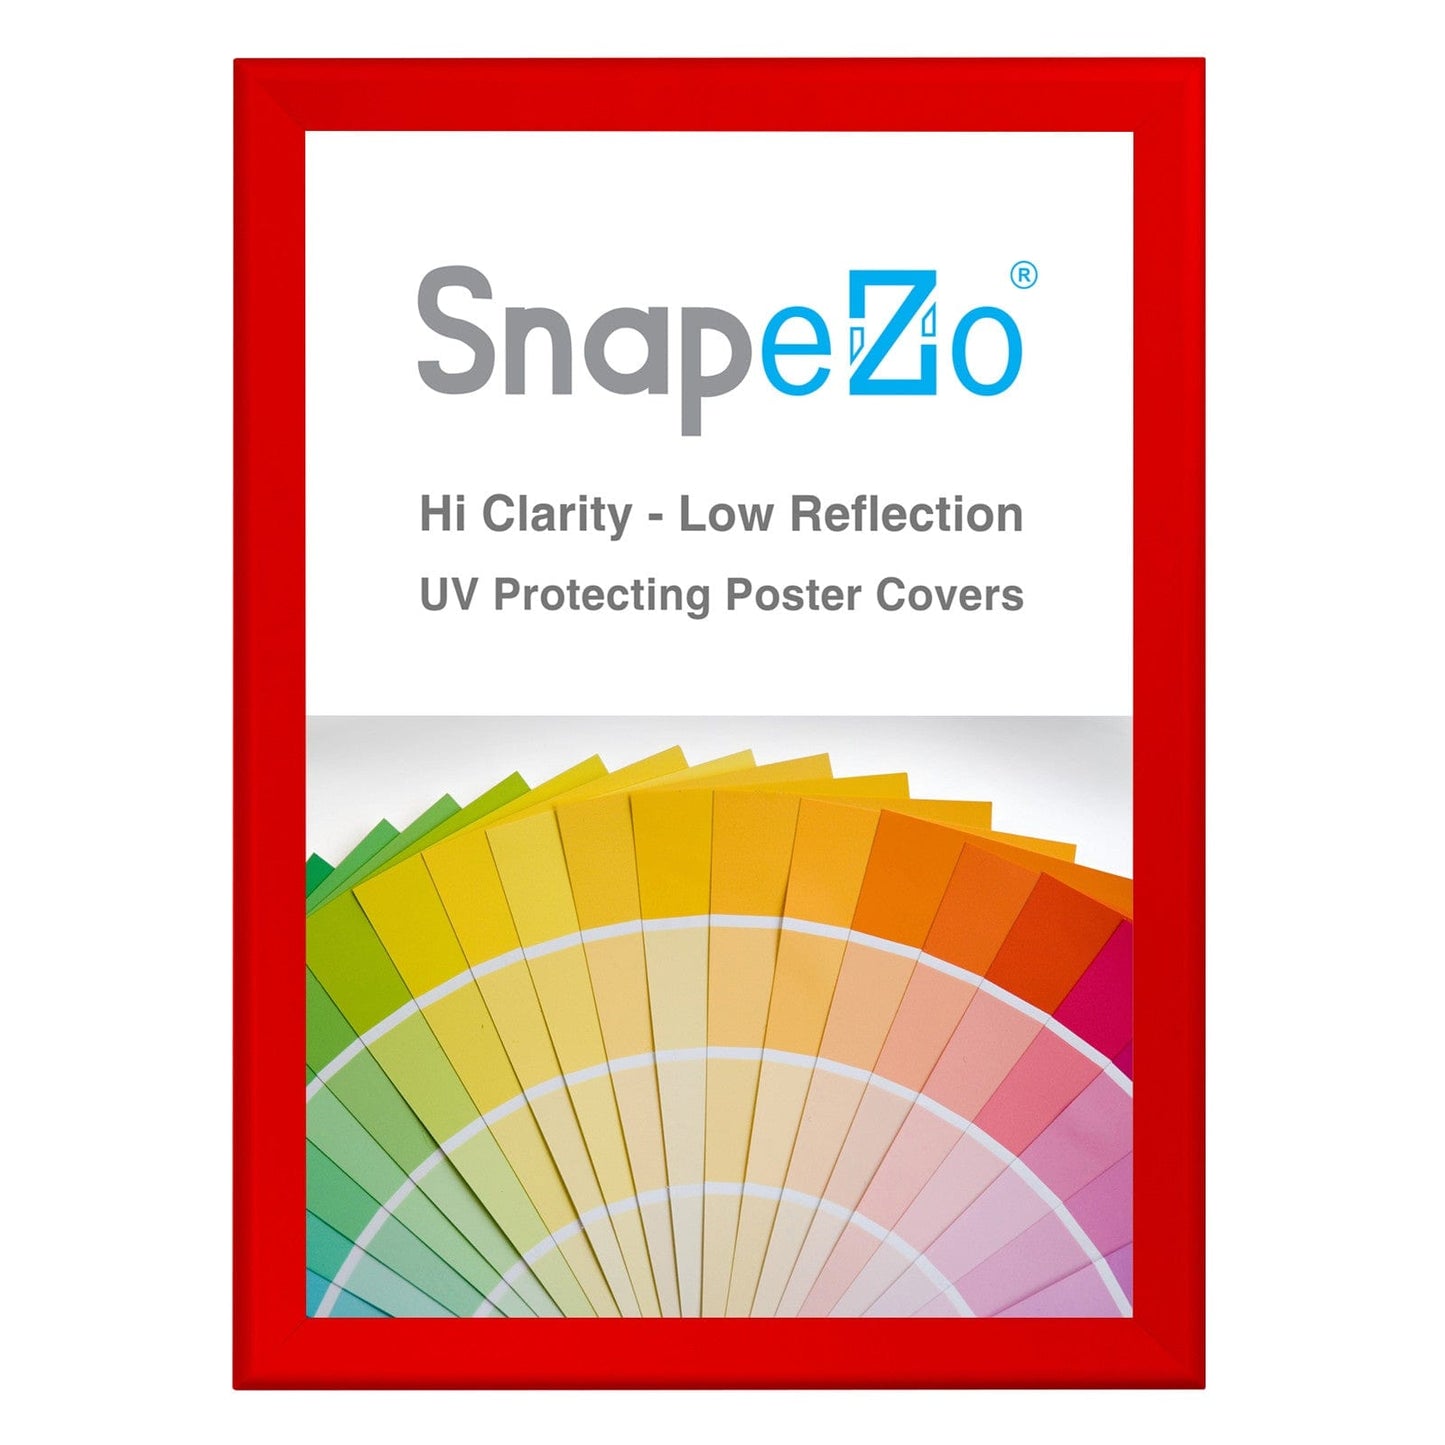 34x48 Red SnapeZo® Snap Frame - 1.7" Profile - Snap Frames Direct